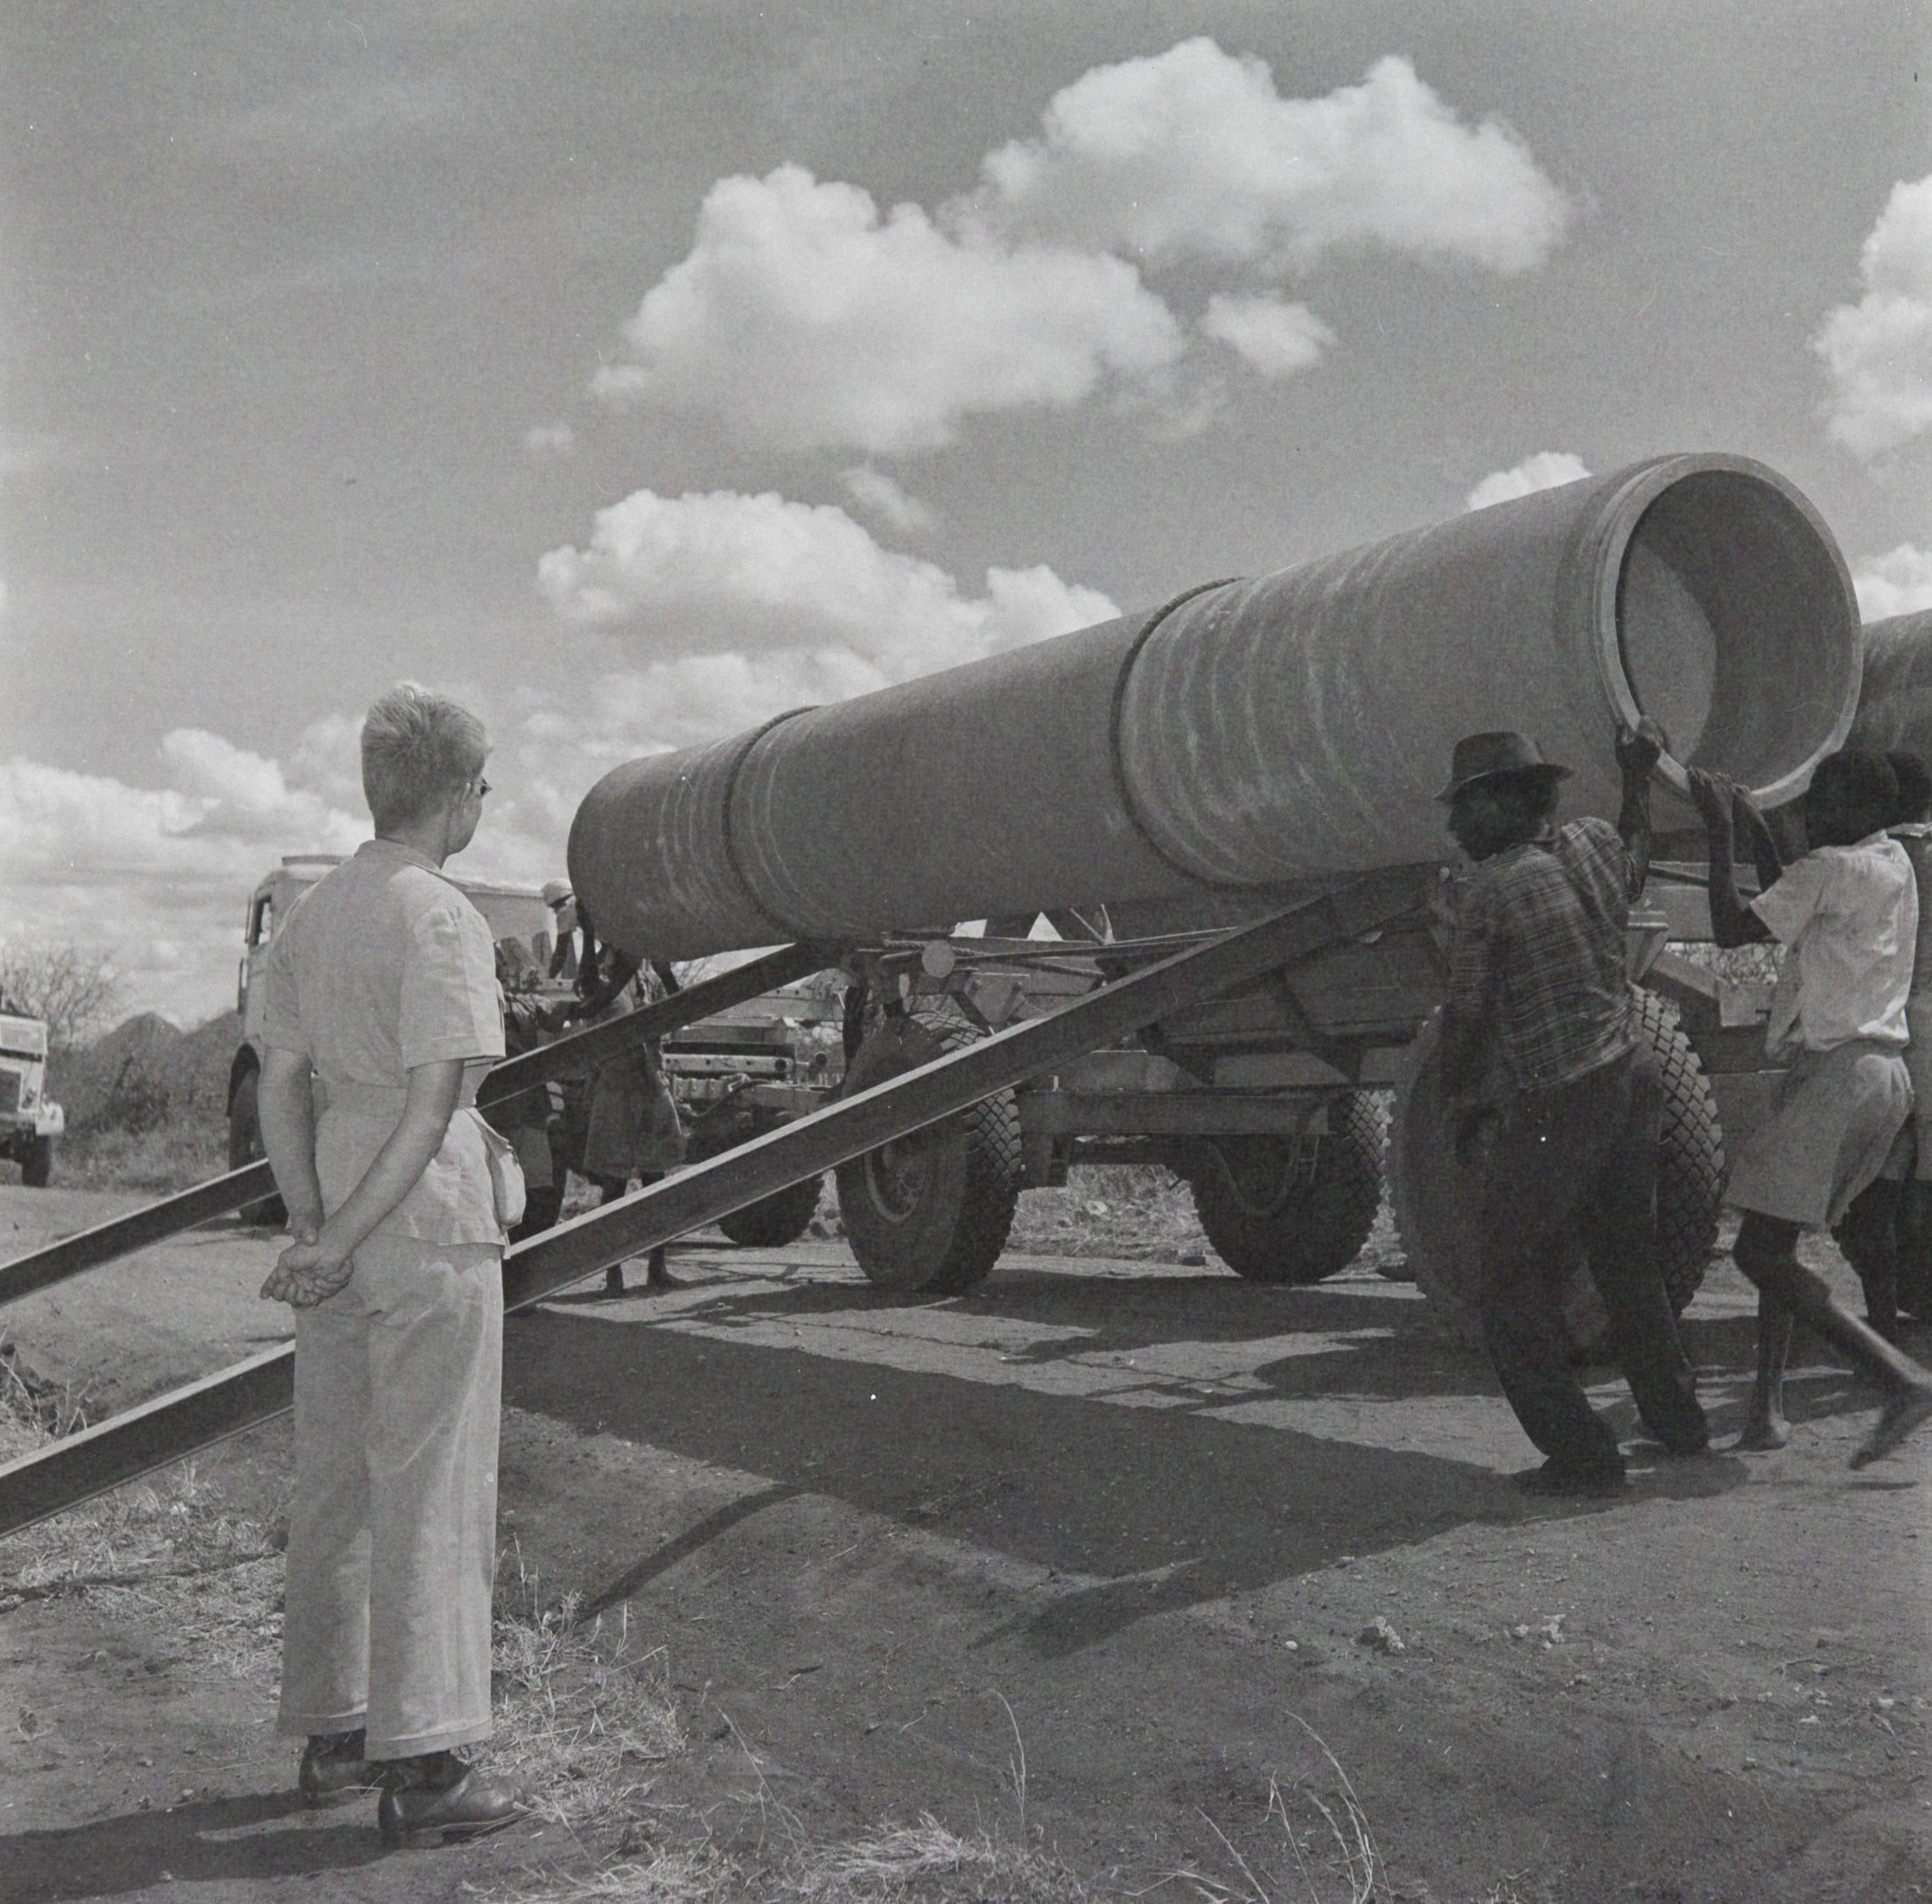 Marie Lindley watches Kenyan workers unloading water pipes. Bristol Archives, BEC collection, 2001/090/1/1/5192